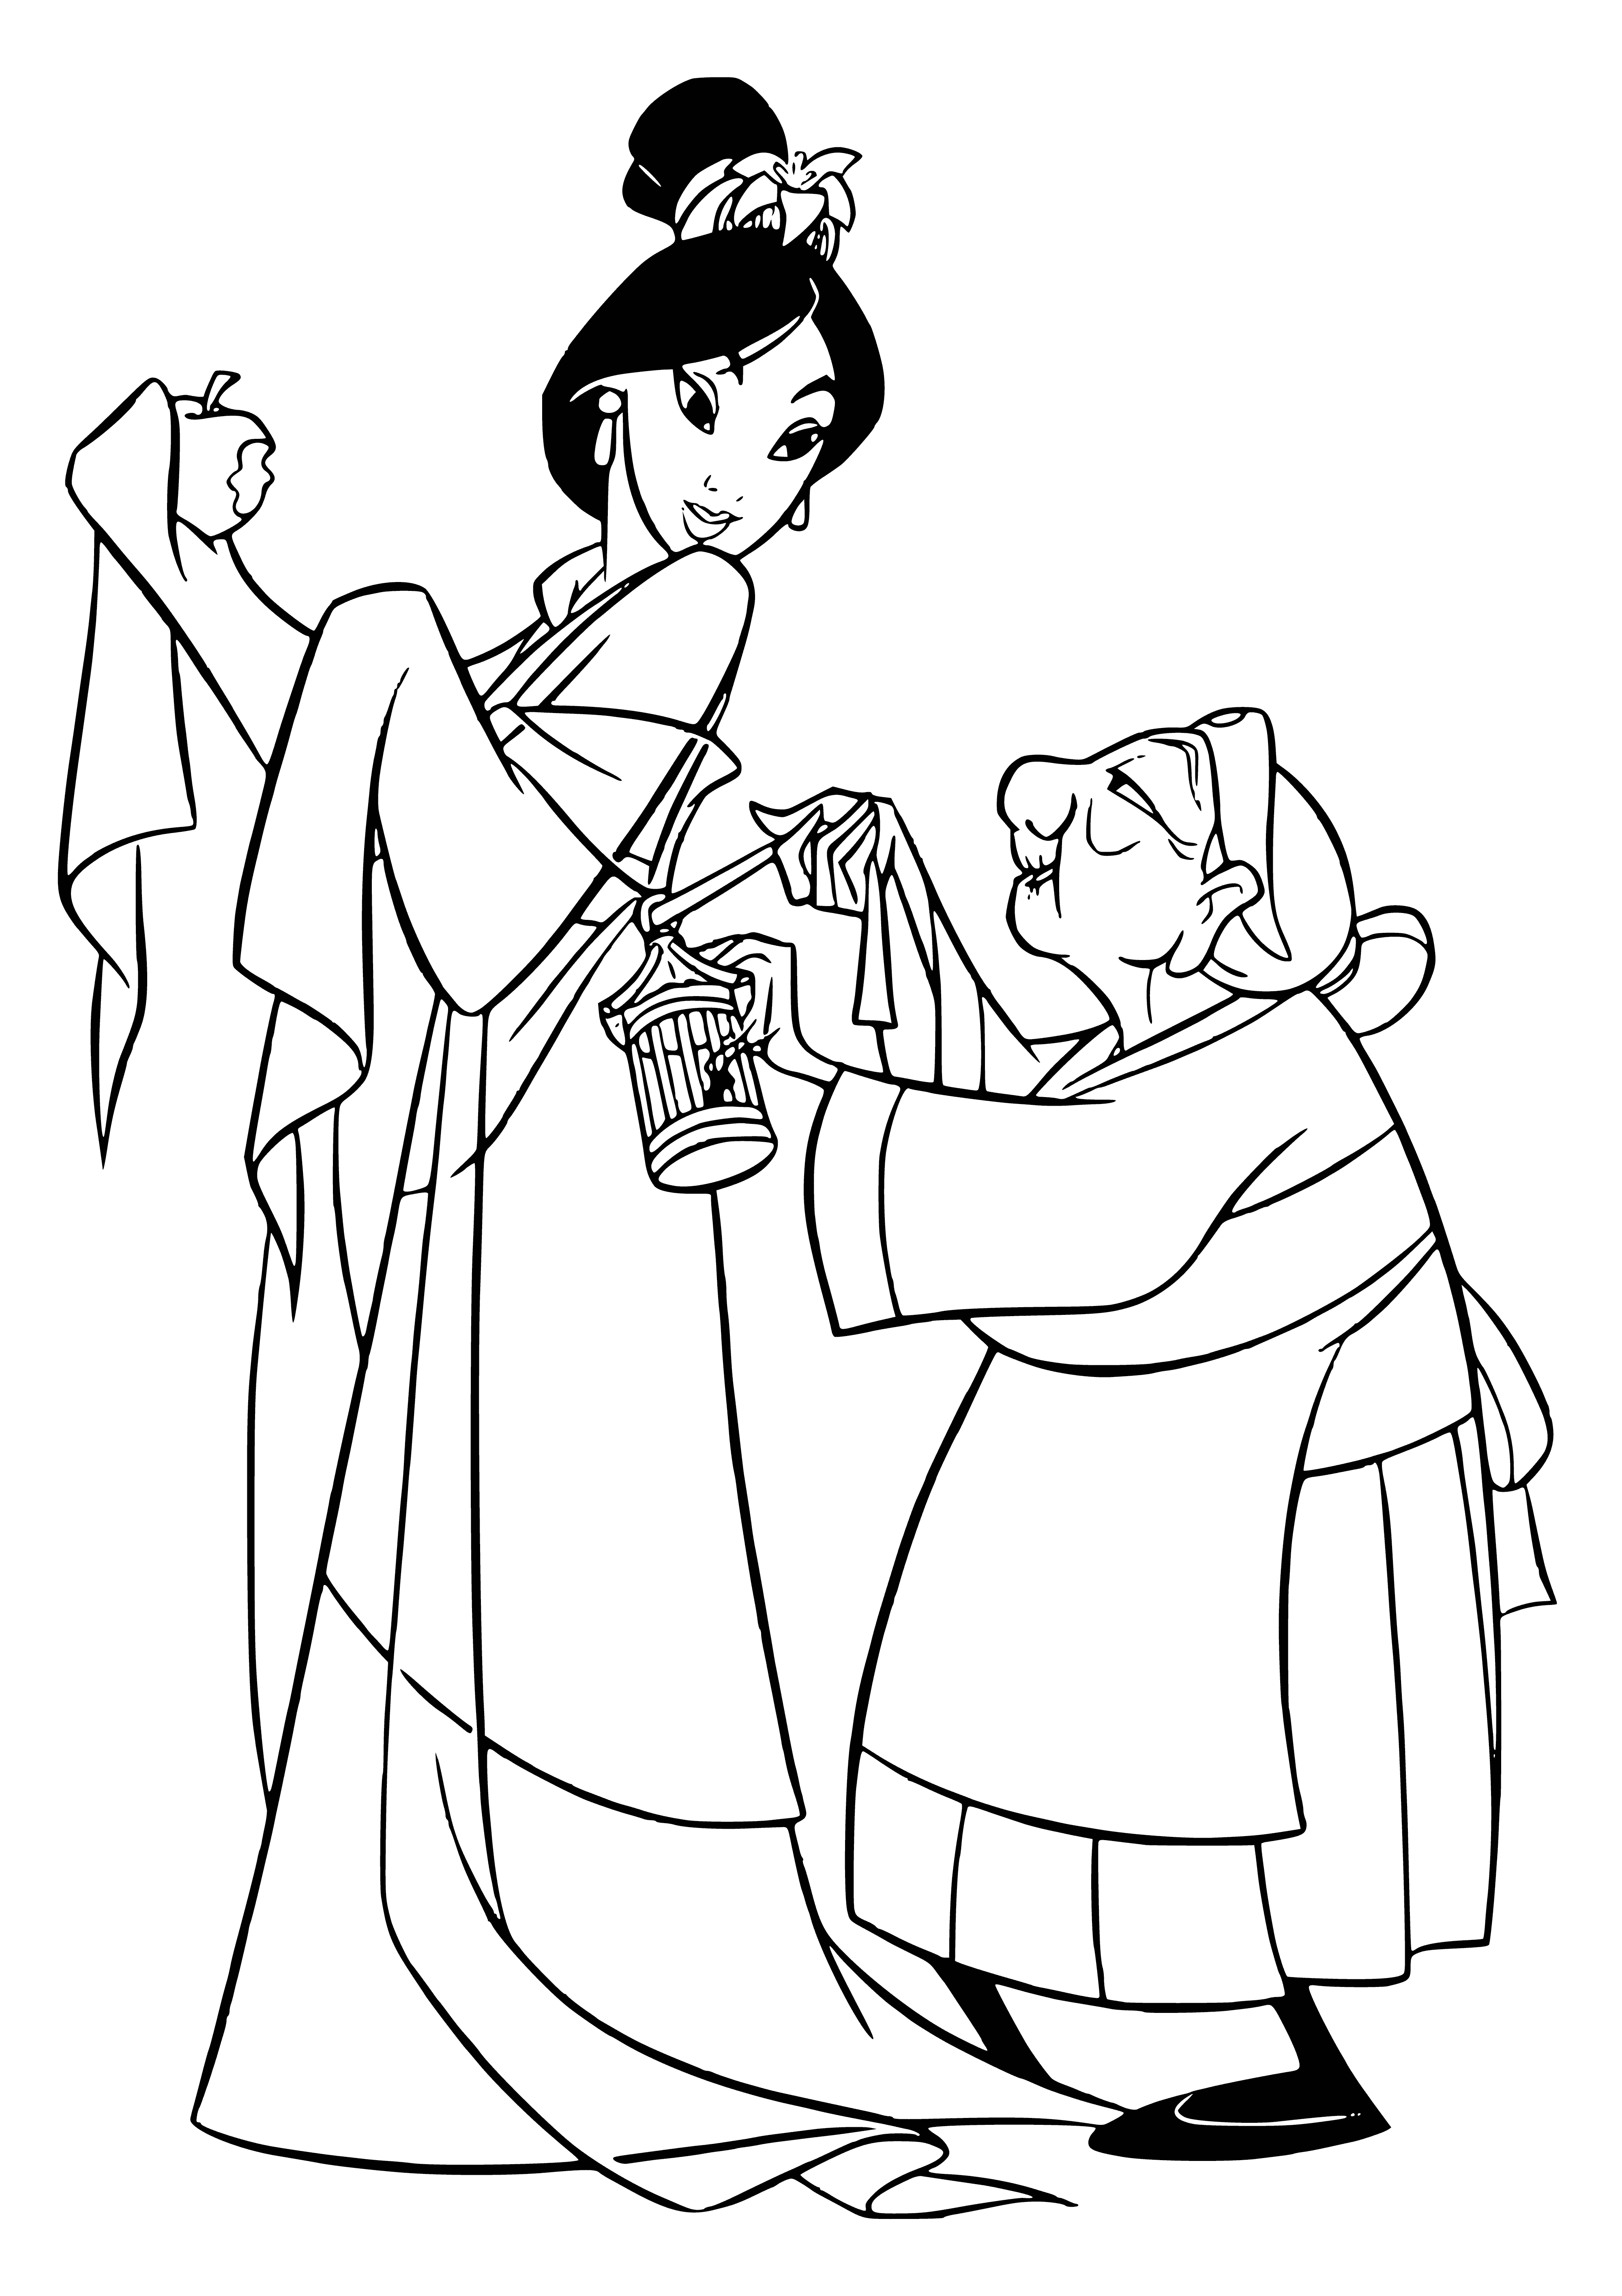 Mulan is going to a matchmaker coloring page